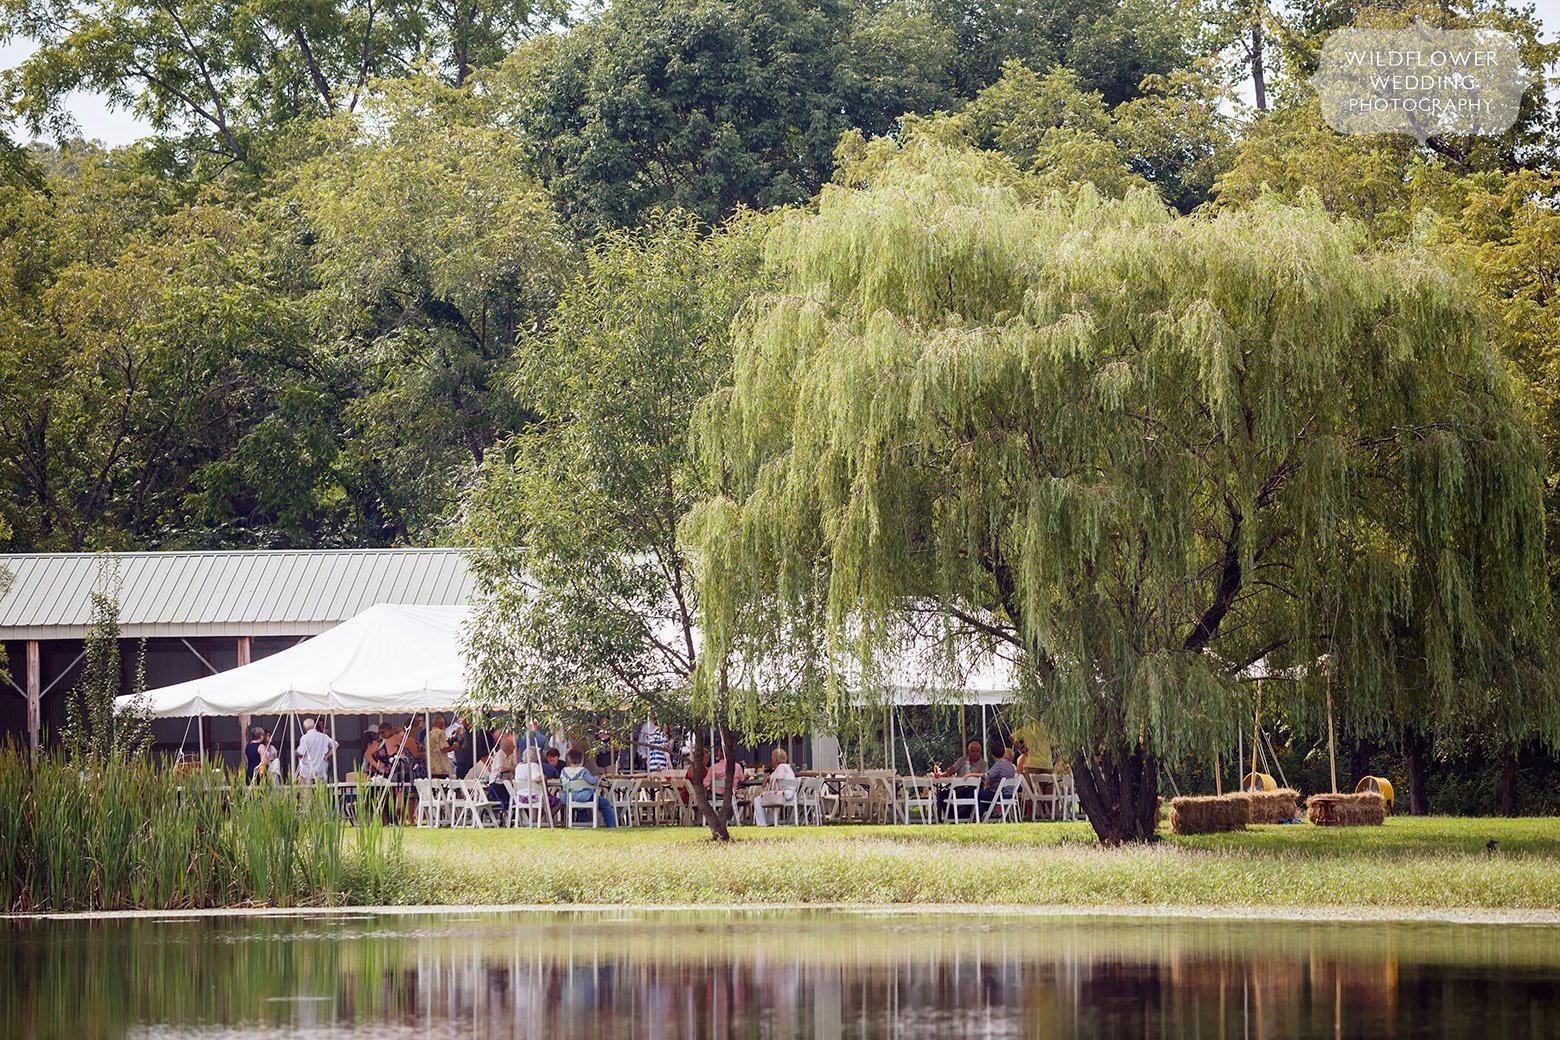 Backyard wedding on a pond in St. James, MO.